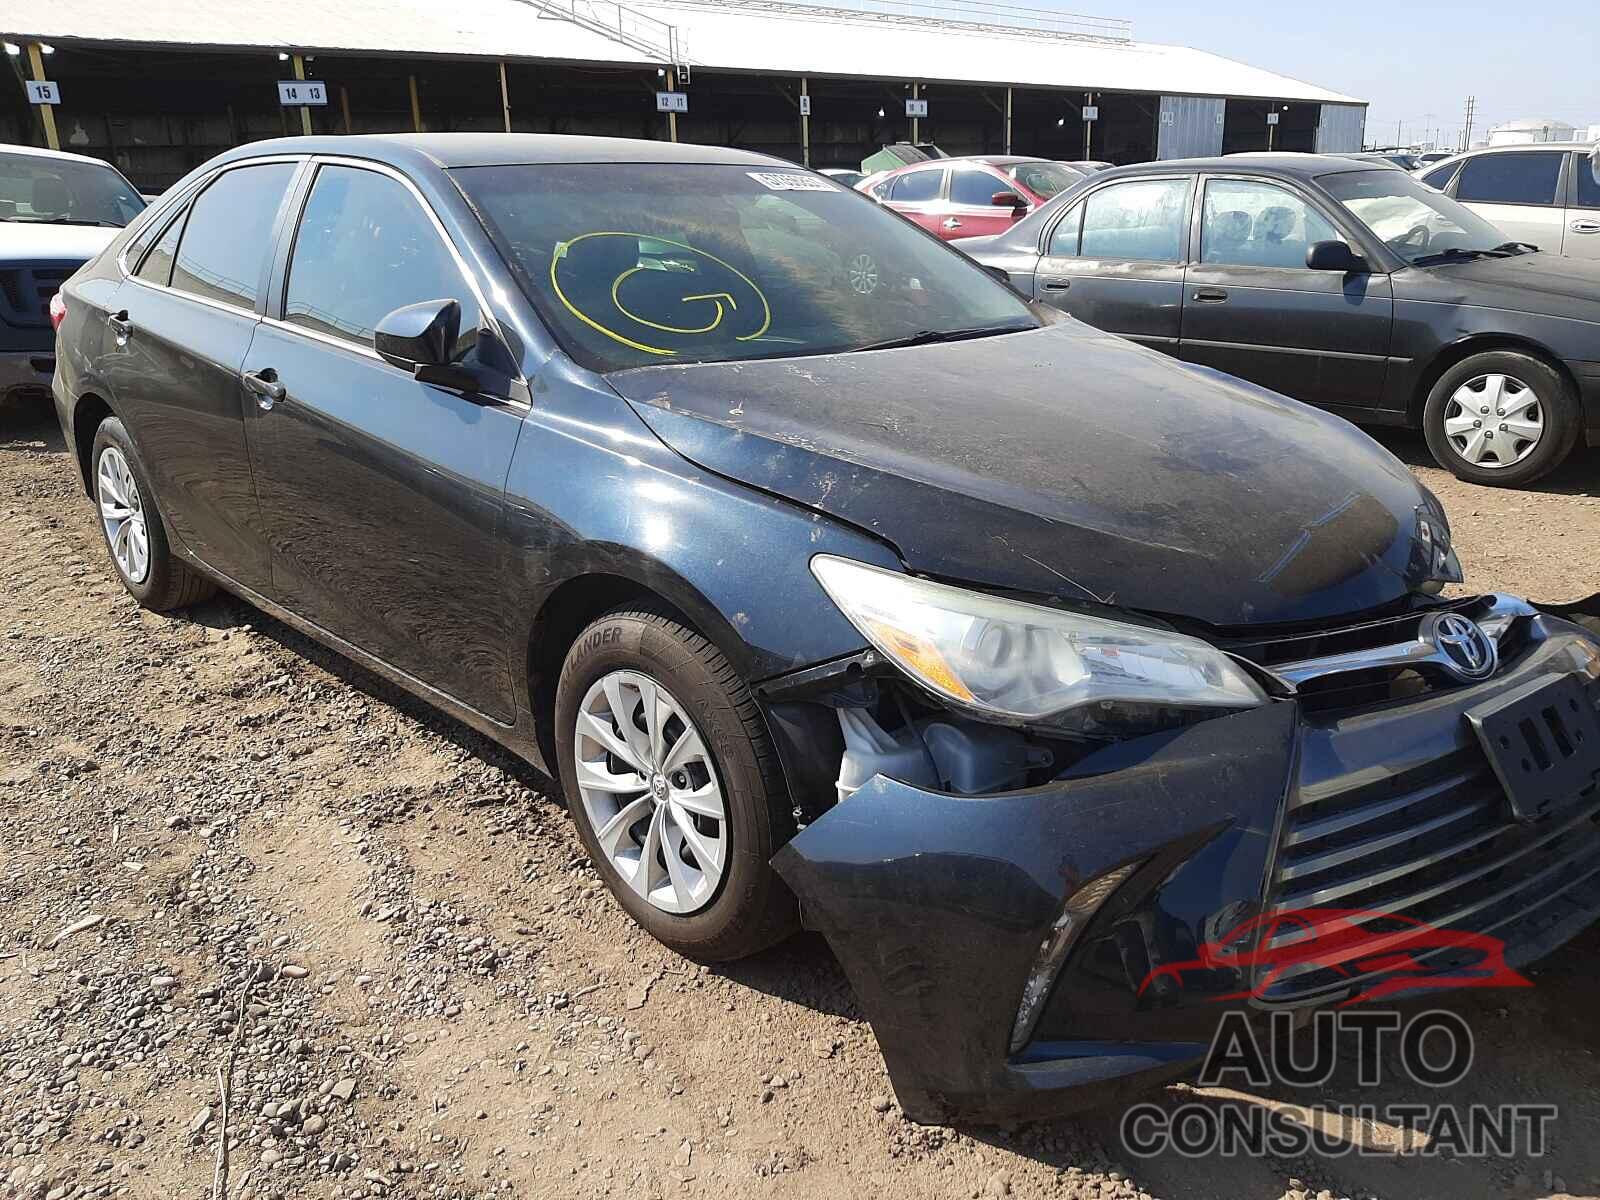 TOYOTA CAMRY 2016 - 4T4BF1FK1GR540287